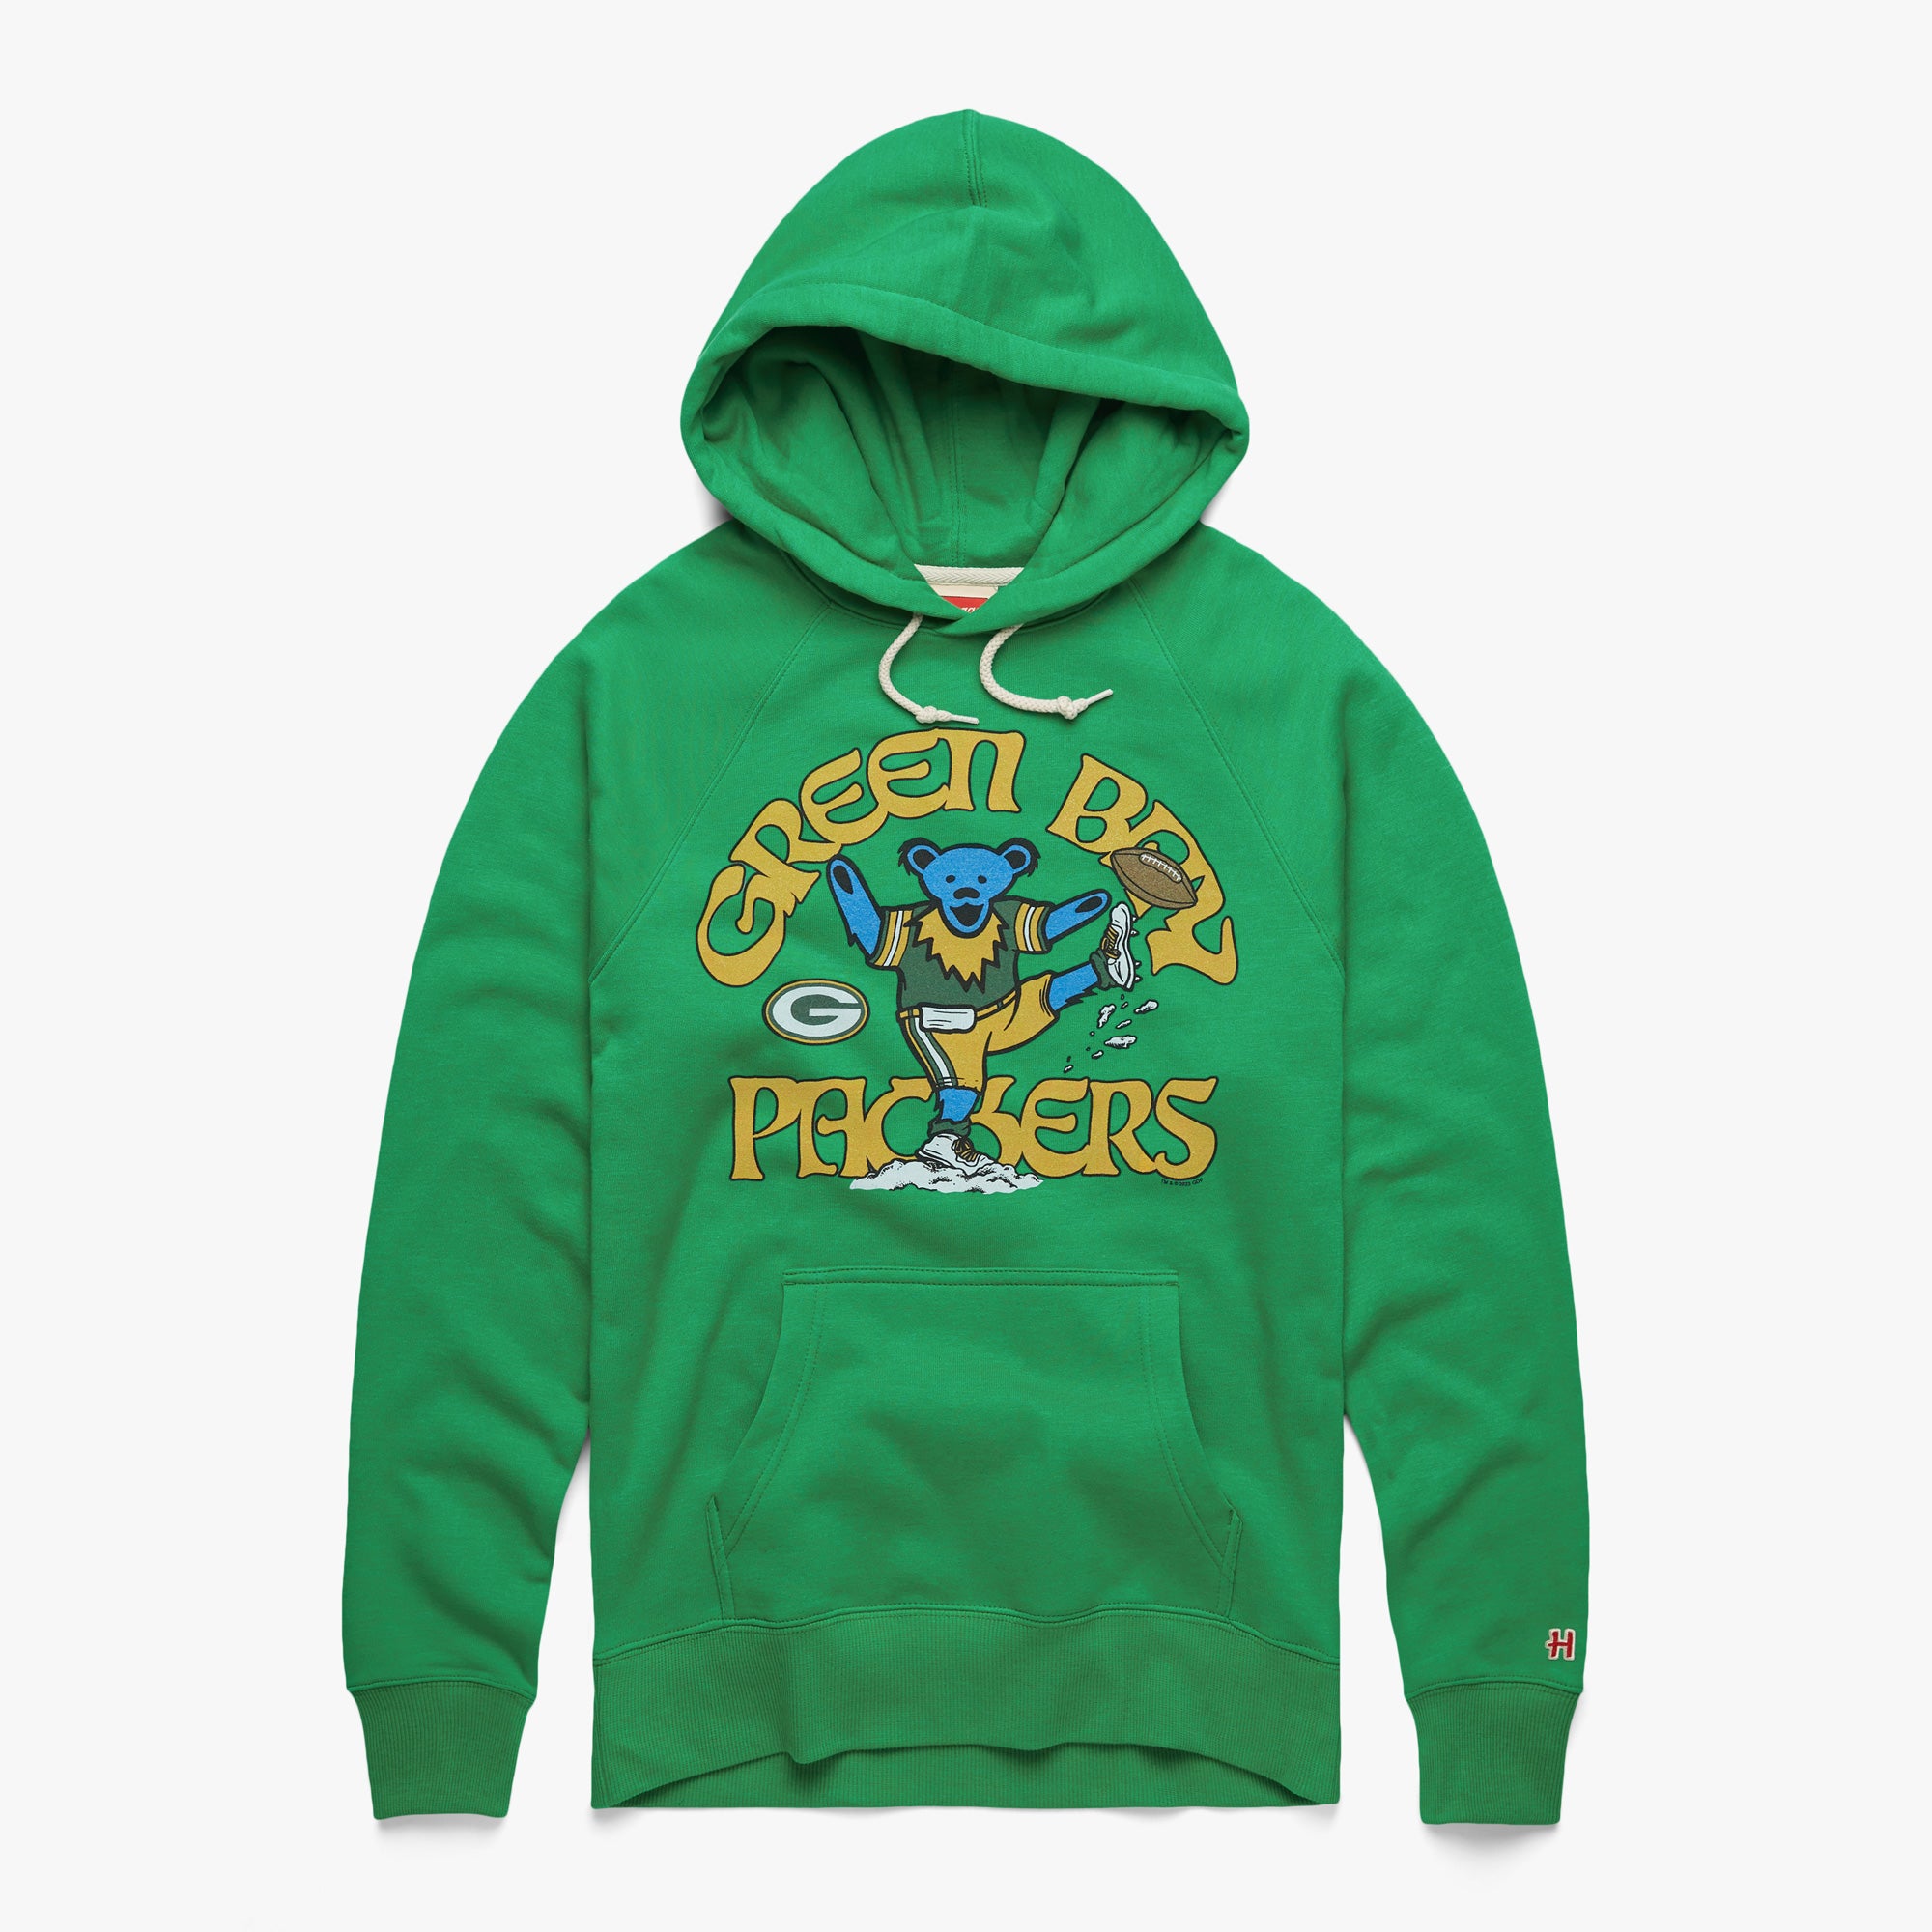 NFL x Grateful Dead x Green Bay Packers Hoodie from Homage. | Officially Licensed Vintage NFL Apparel from Homage Pro Shop.